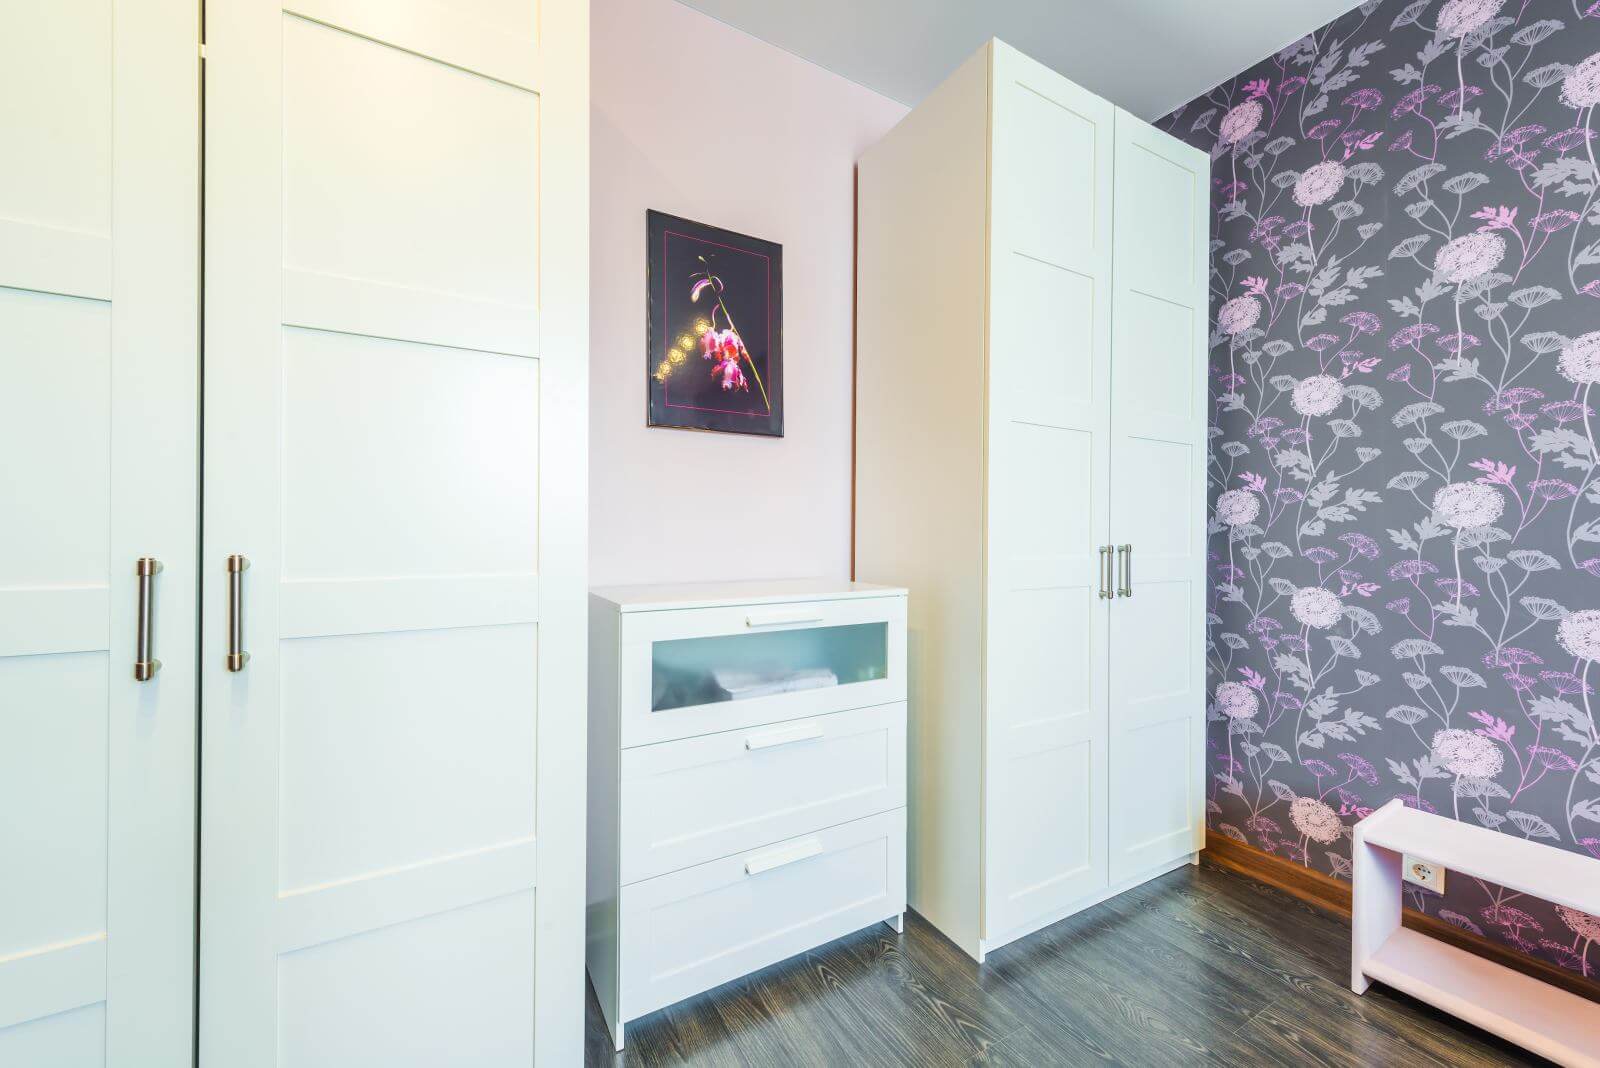 Interior bedrooms with wardrobes, chest of drawers, bedside table against the background of modern wallpaper